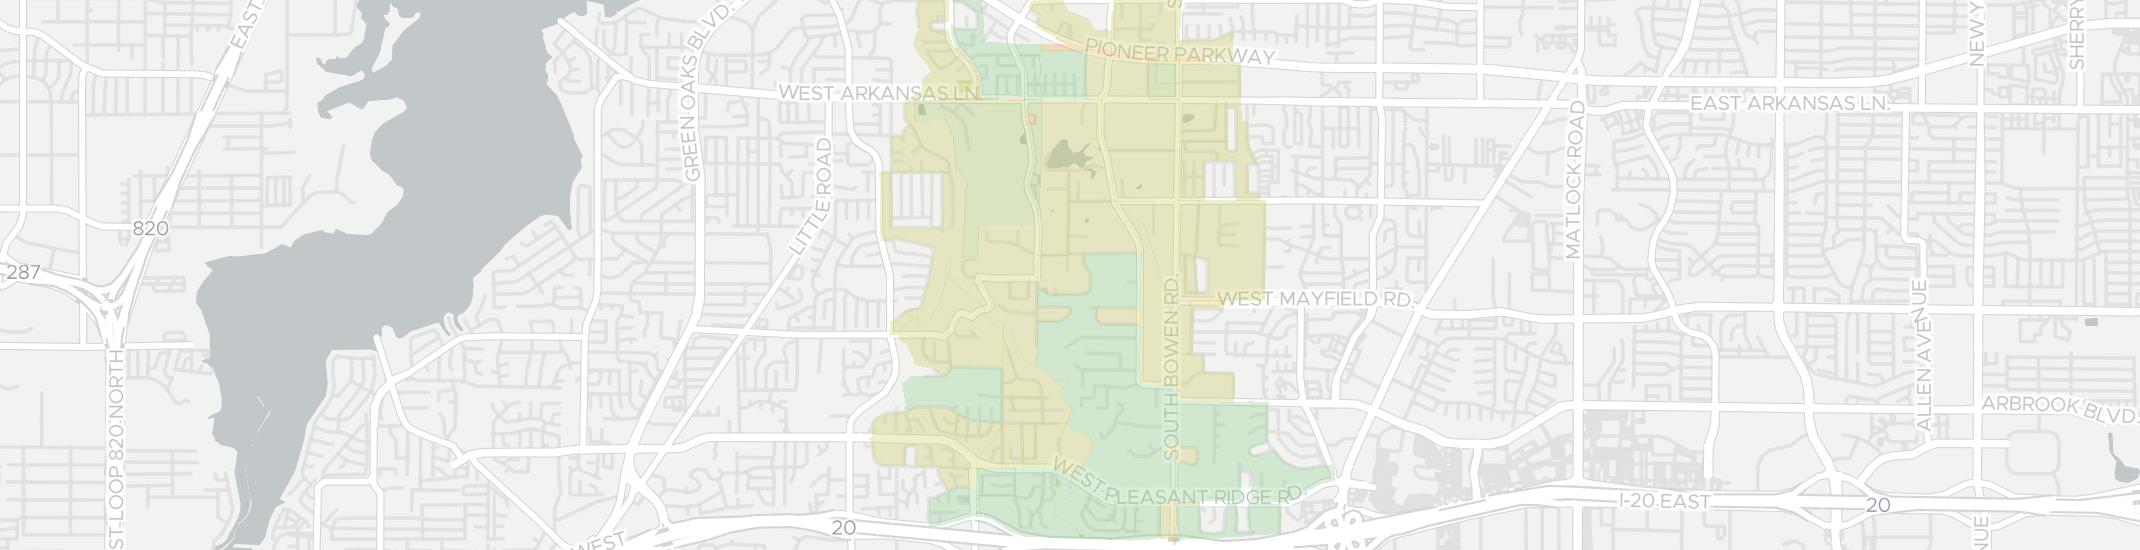 Dalworthington Gardens Internet Competition Map. Click for interactive map.